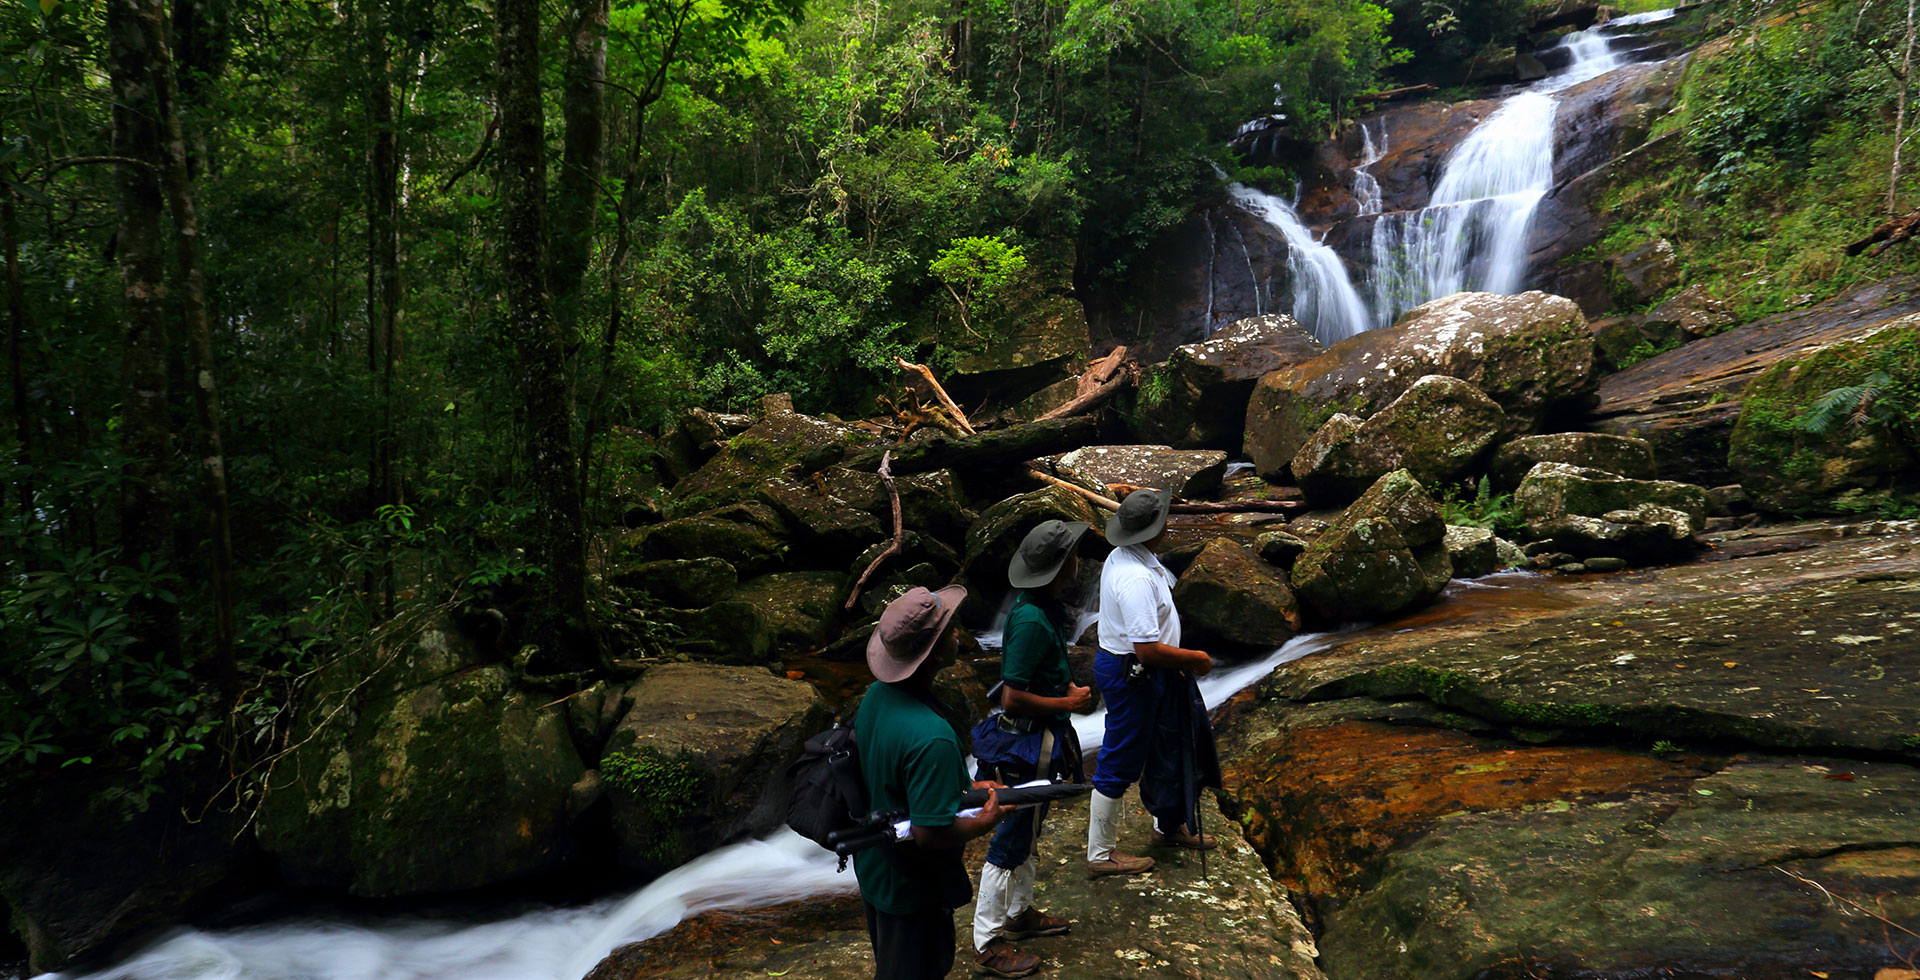 Tourists walk up some rocks leading to a small waterfall